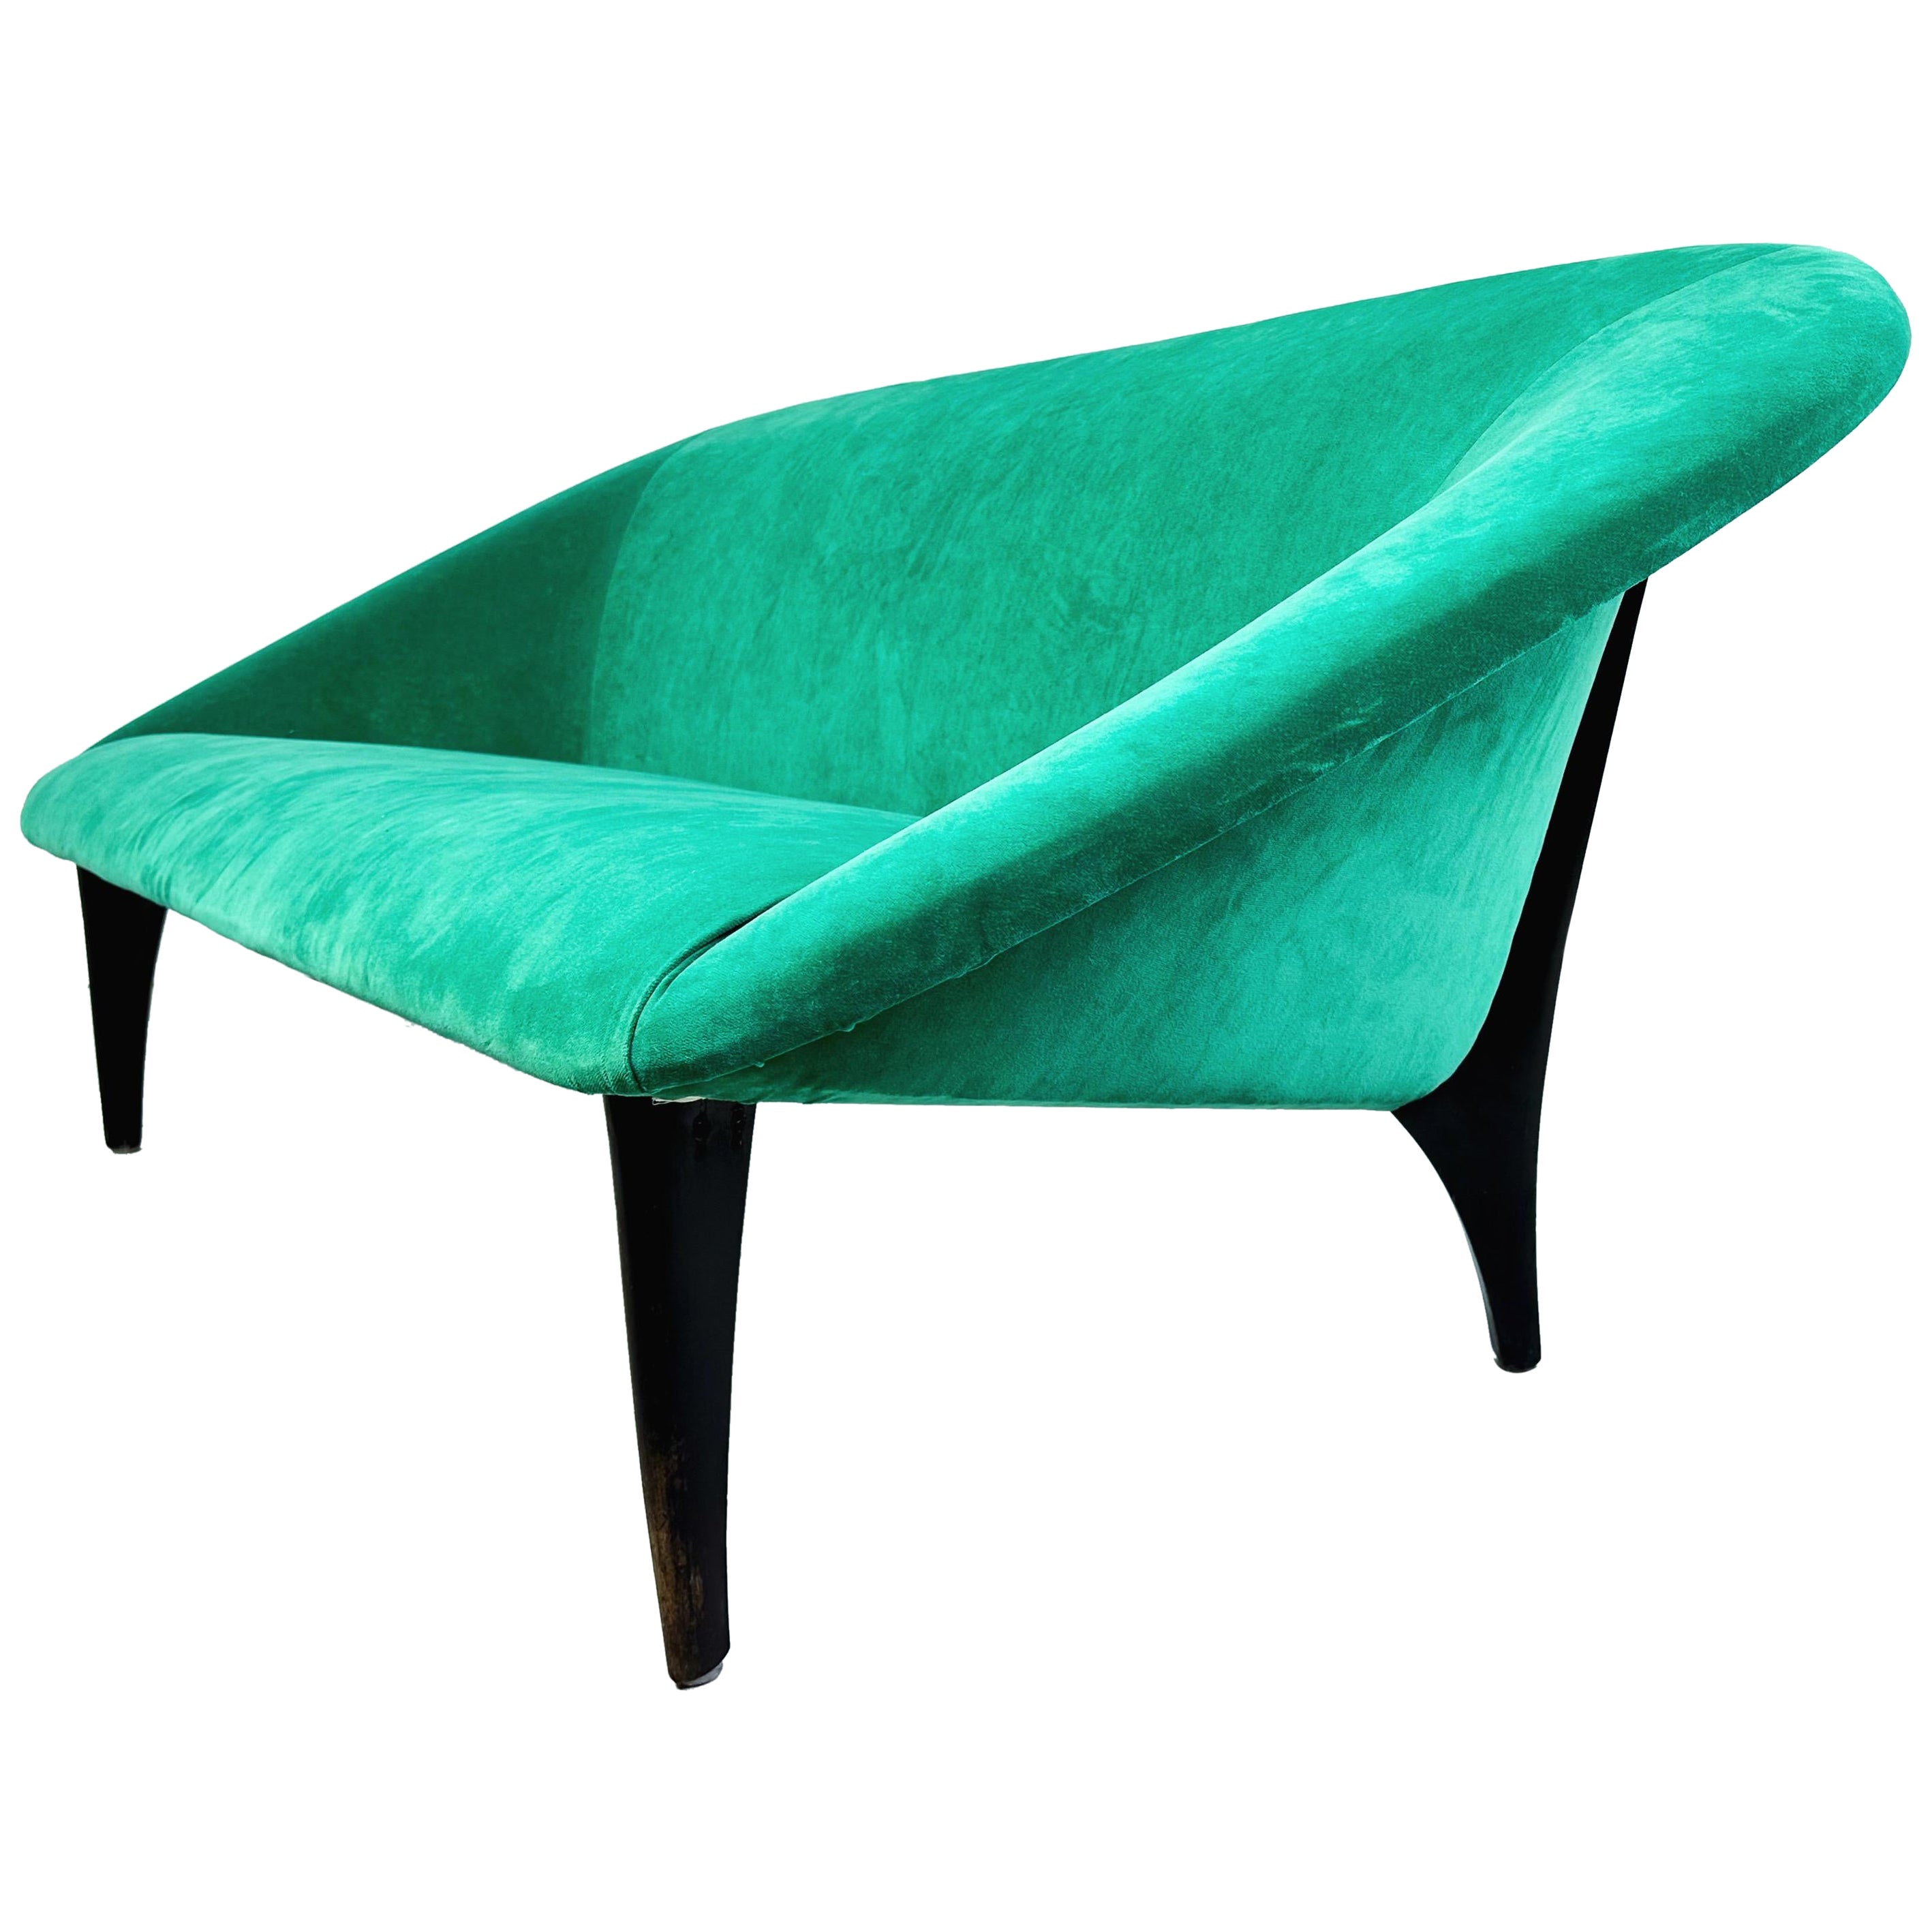 Arne Norell “Lido” Sofa for Westbergs Mobler